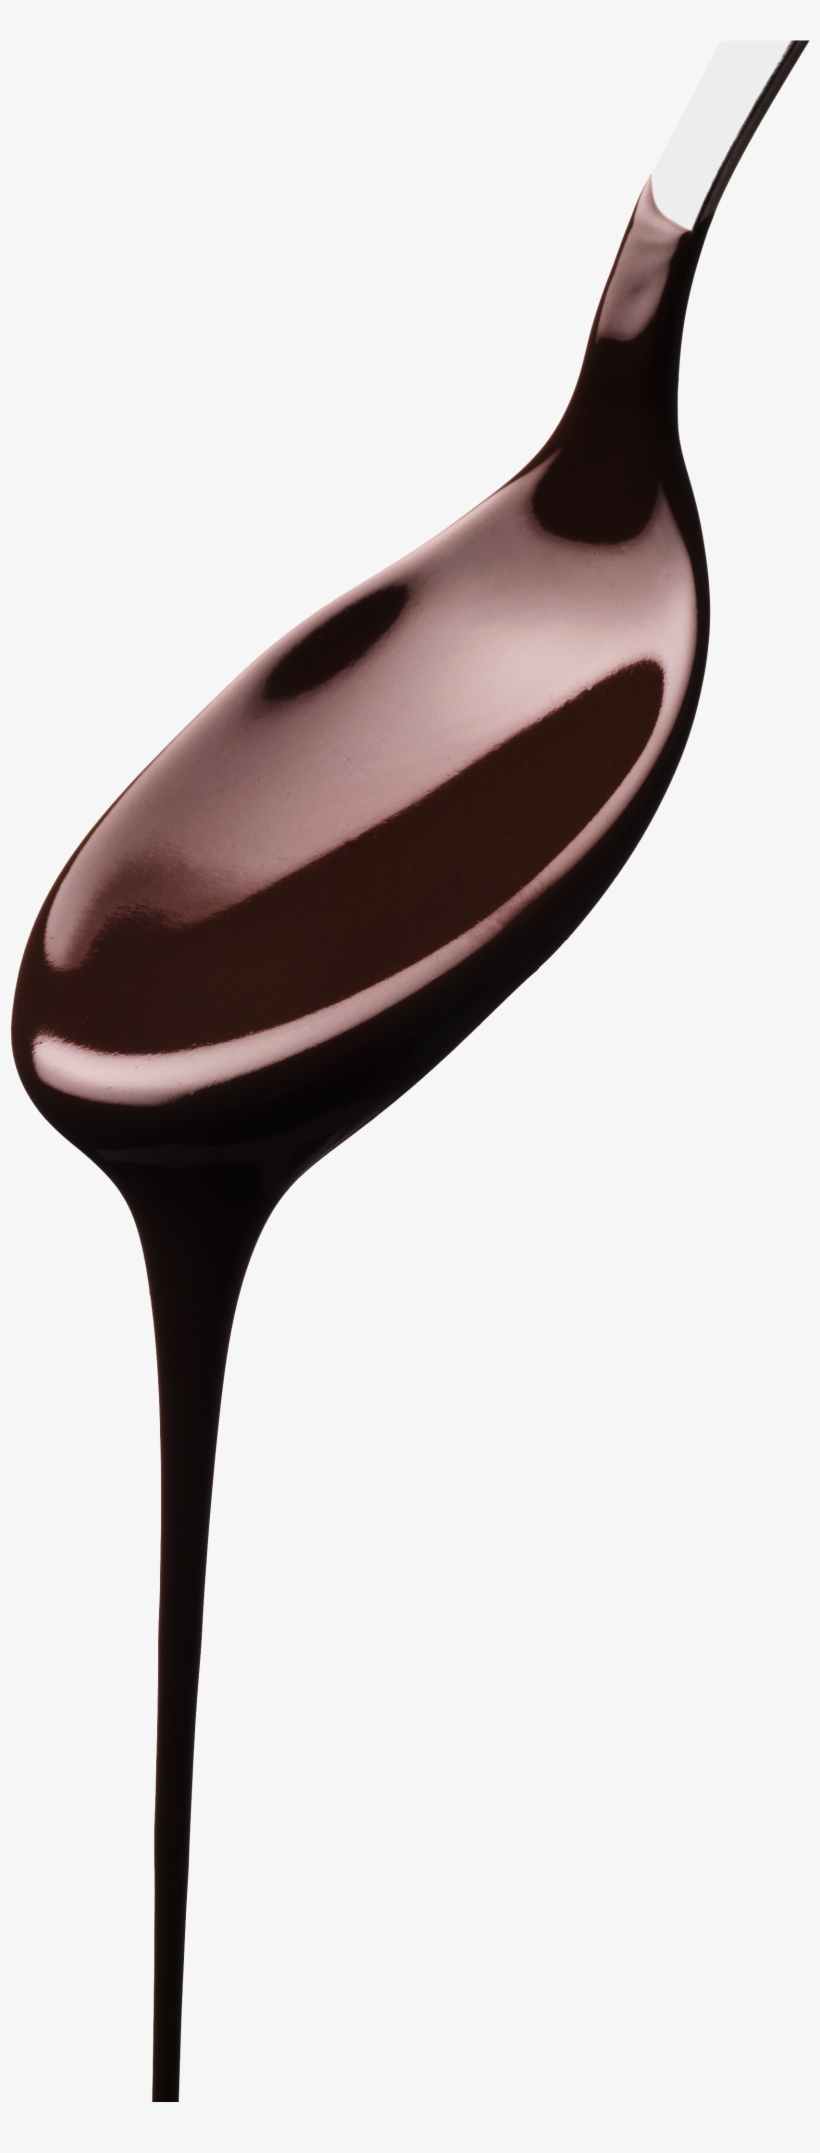 Chocolate Trubites - Spoon With Chocolate Png, transparent png #3014346